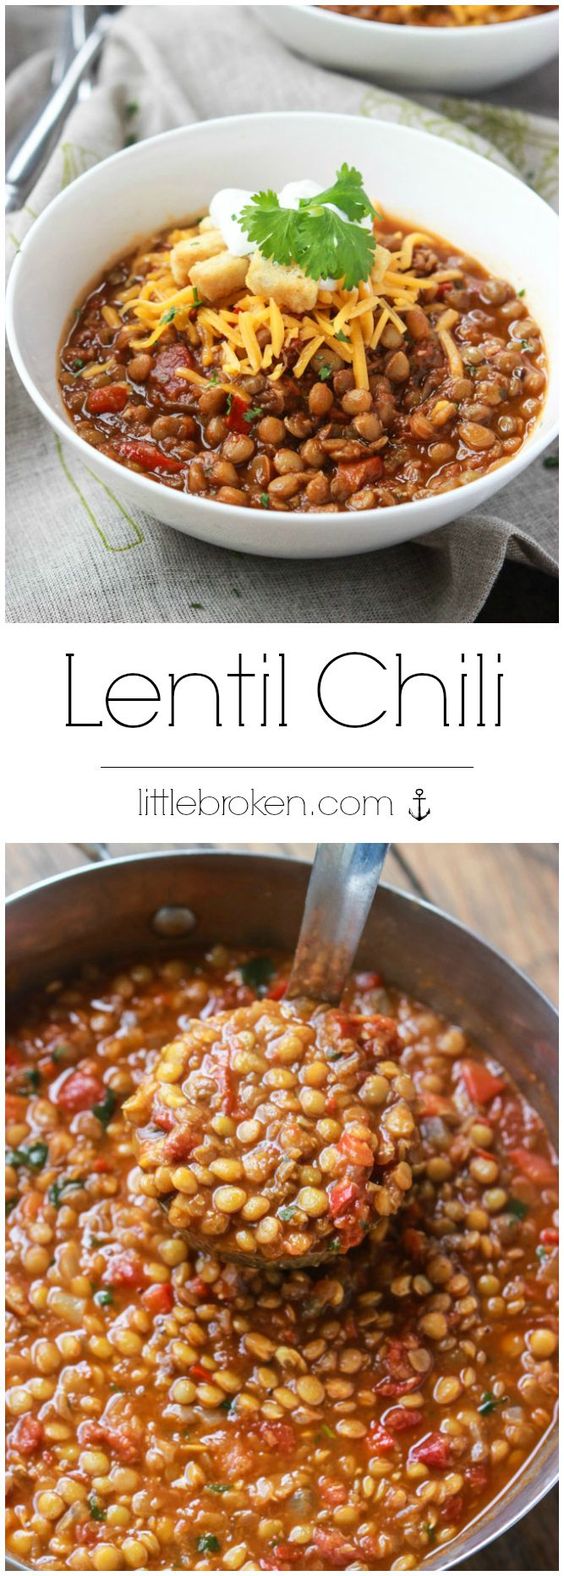 Meatless lentil chili with simple ingredients and flavorful spices. It's wholesome, filling, and makes one easy weeknight meal.